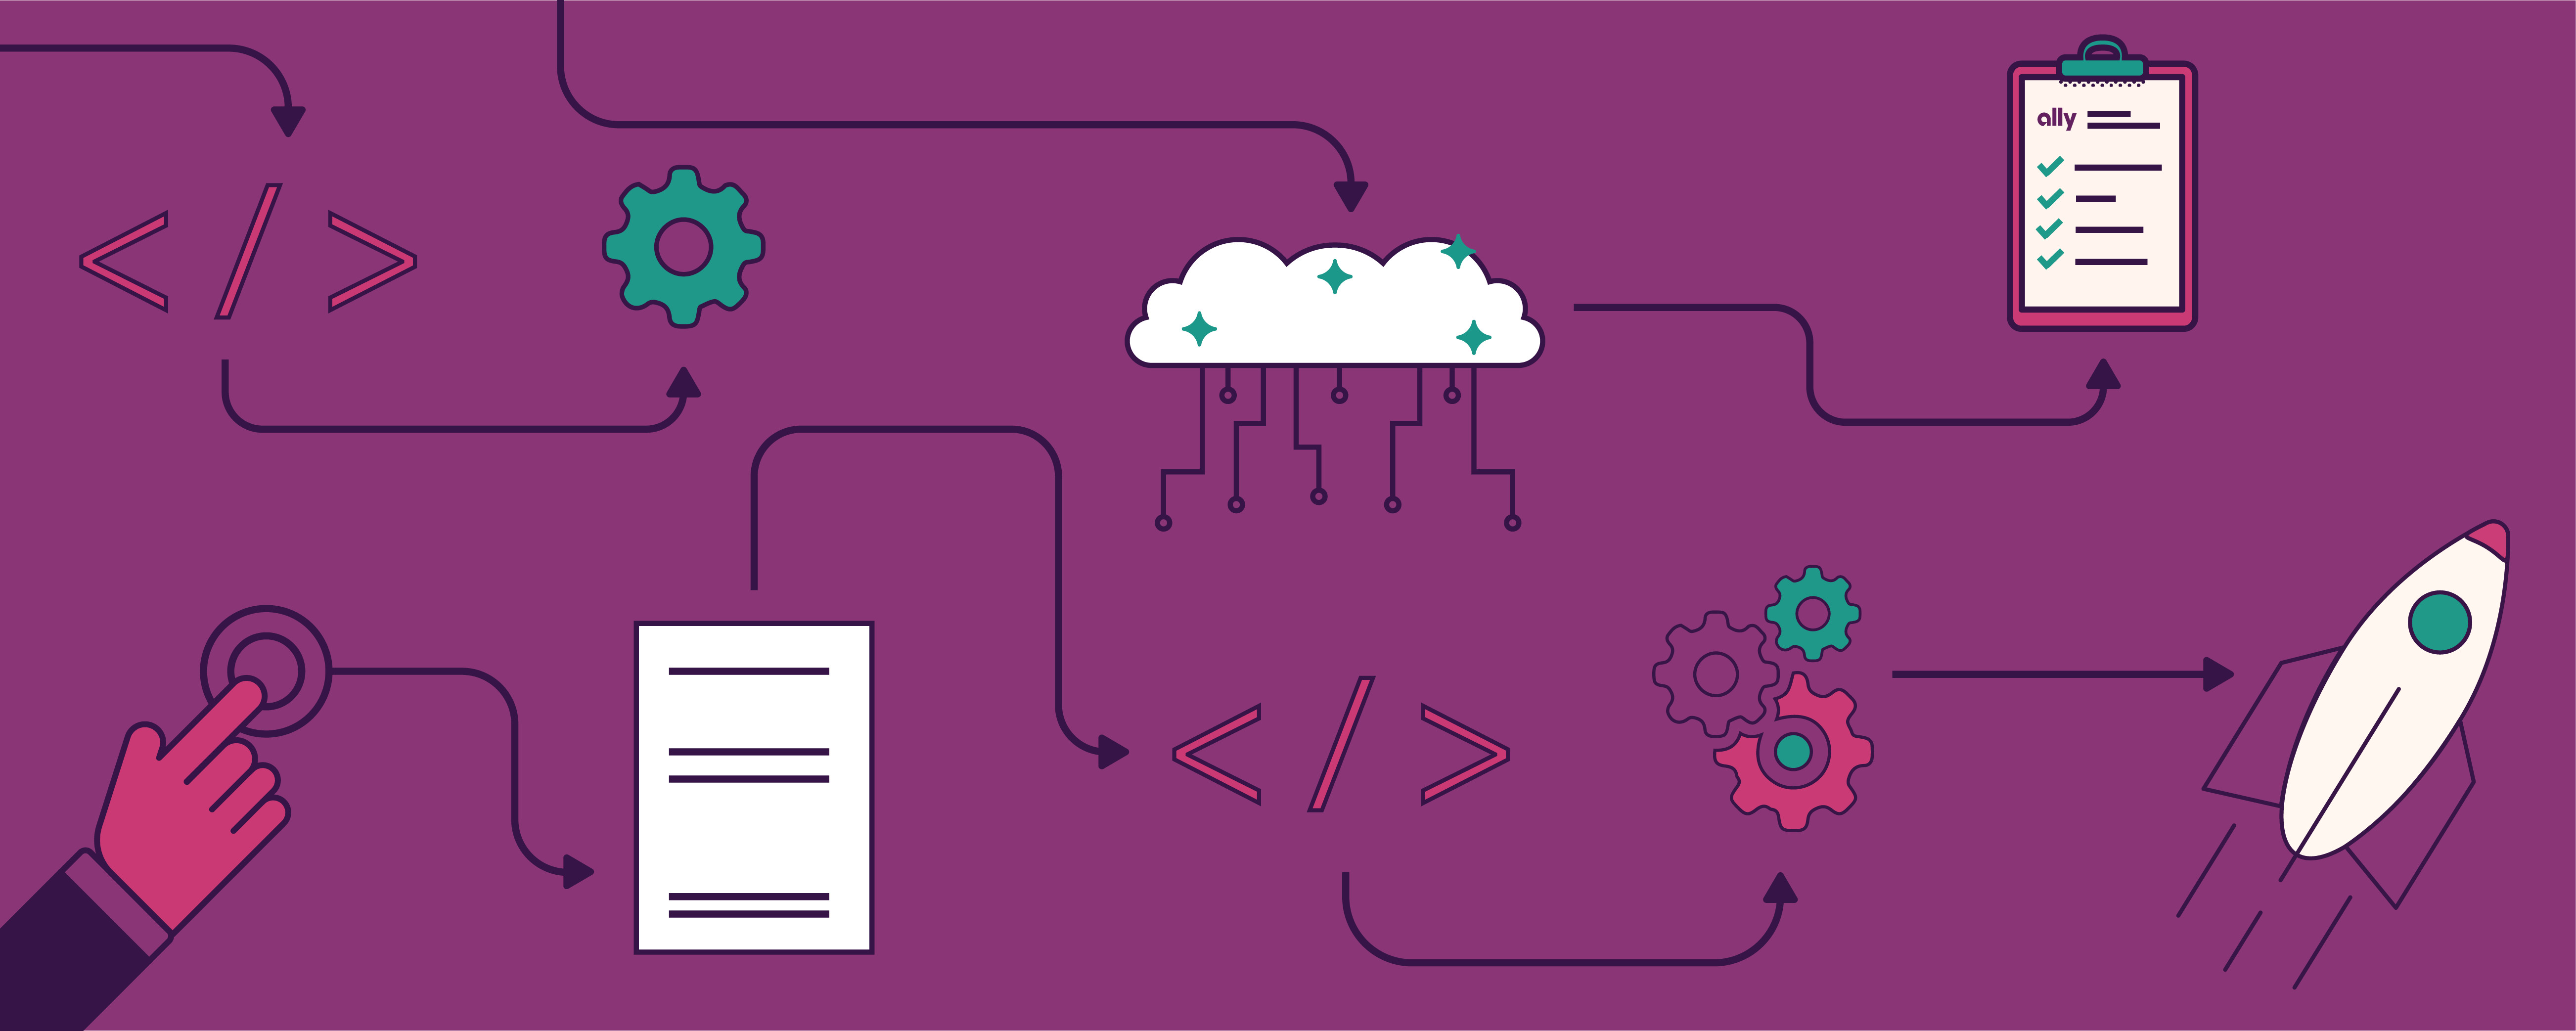 Illustration: Multicolored icons of gears, a clipboard and paper, and a rocketship connected by dark purple arrows surround a white cloud with mint green stars and lines to visualize Ally's technology transformation to the cloud. 